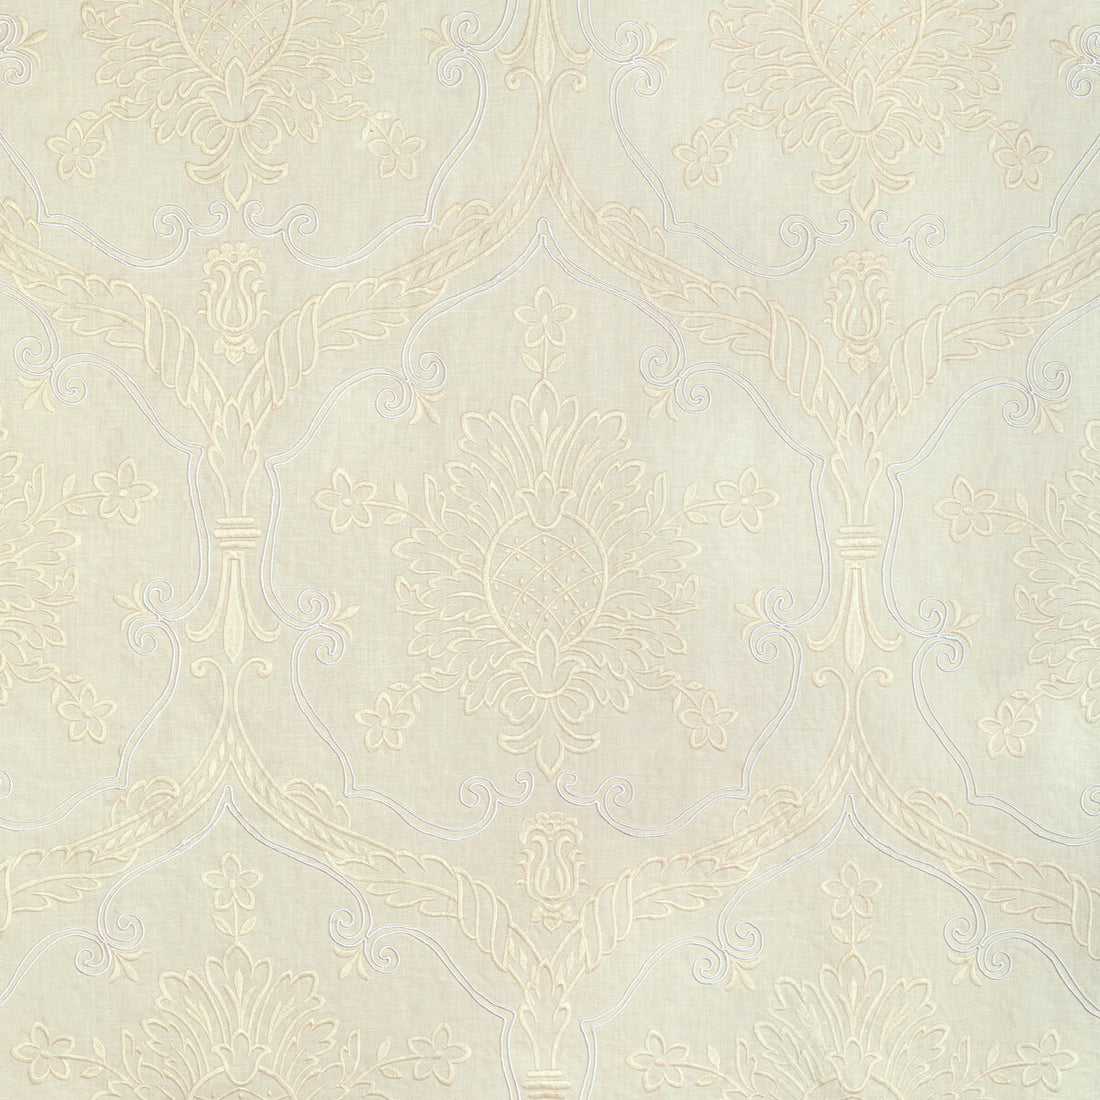 Hayes Embroidery fabric in ivory color - pattern 2022110.1.0 - by Lee Jofa in the Bunny Williams Arcadia collection